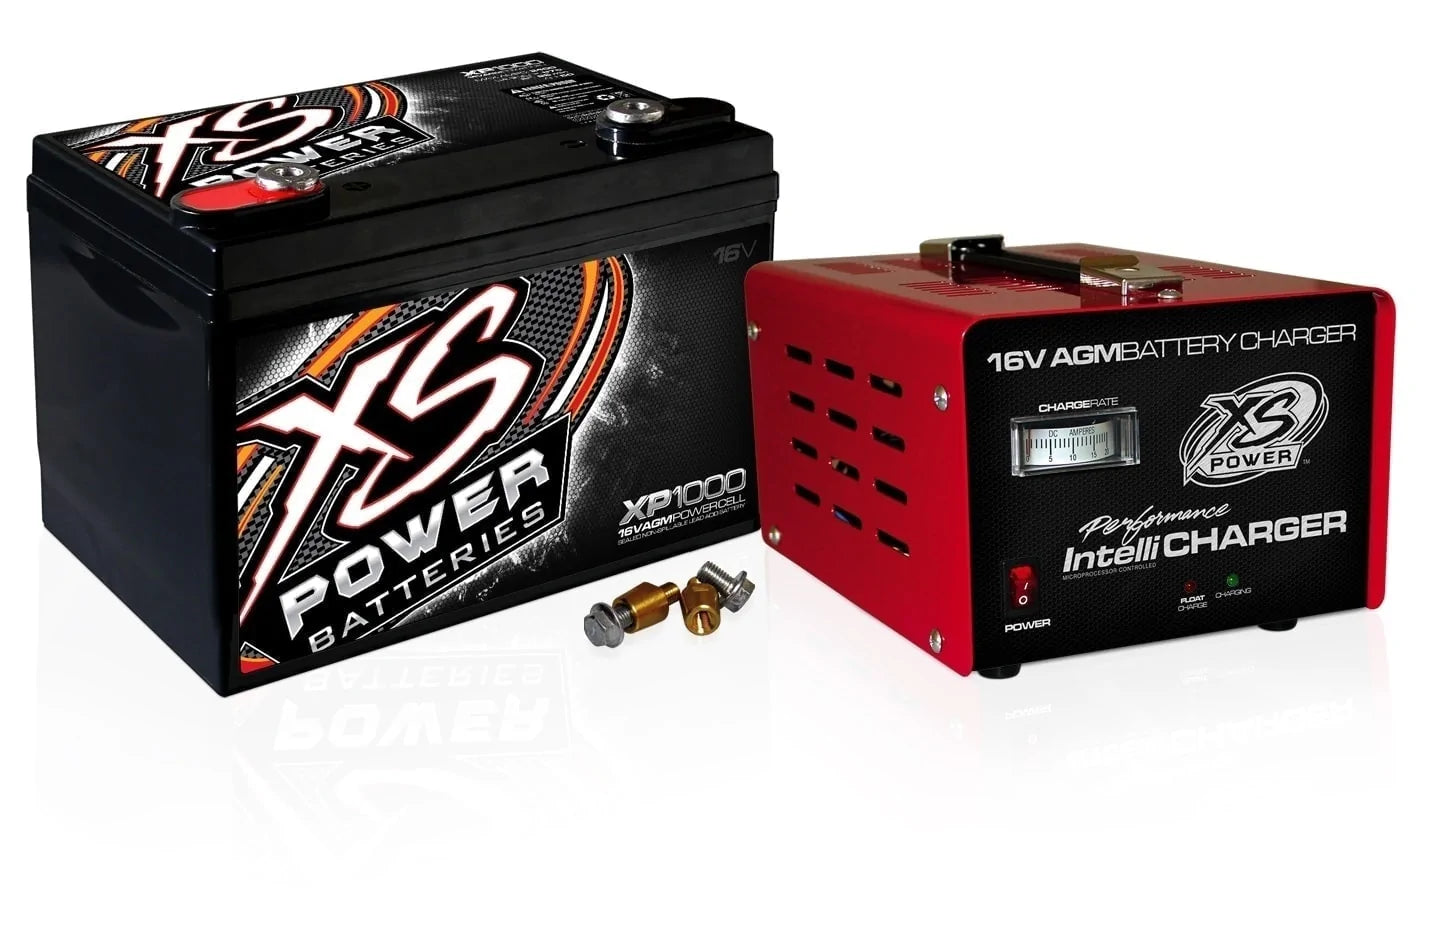 XS Power XP1000CK2 16VDC AGM Car Audio Battery and 1004 IntelliCHARGER Combo Kit